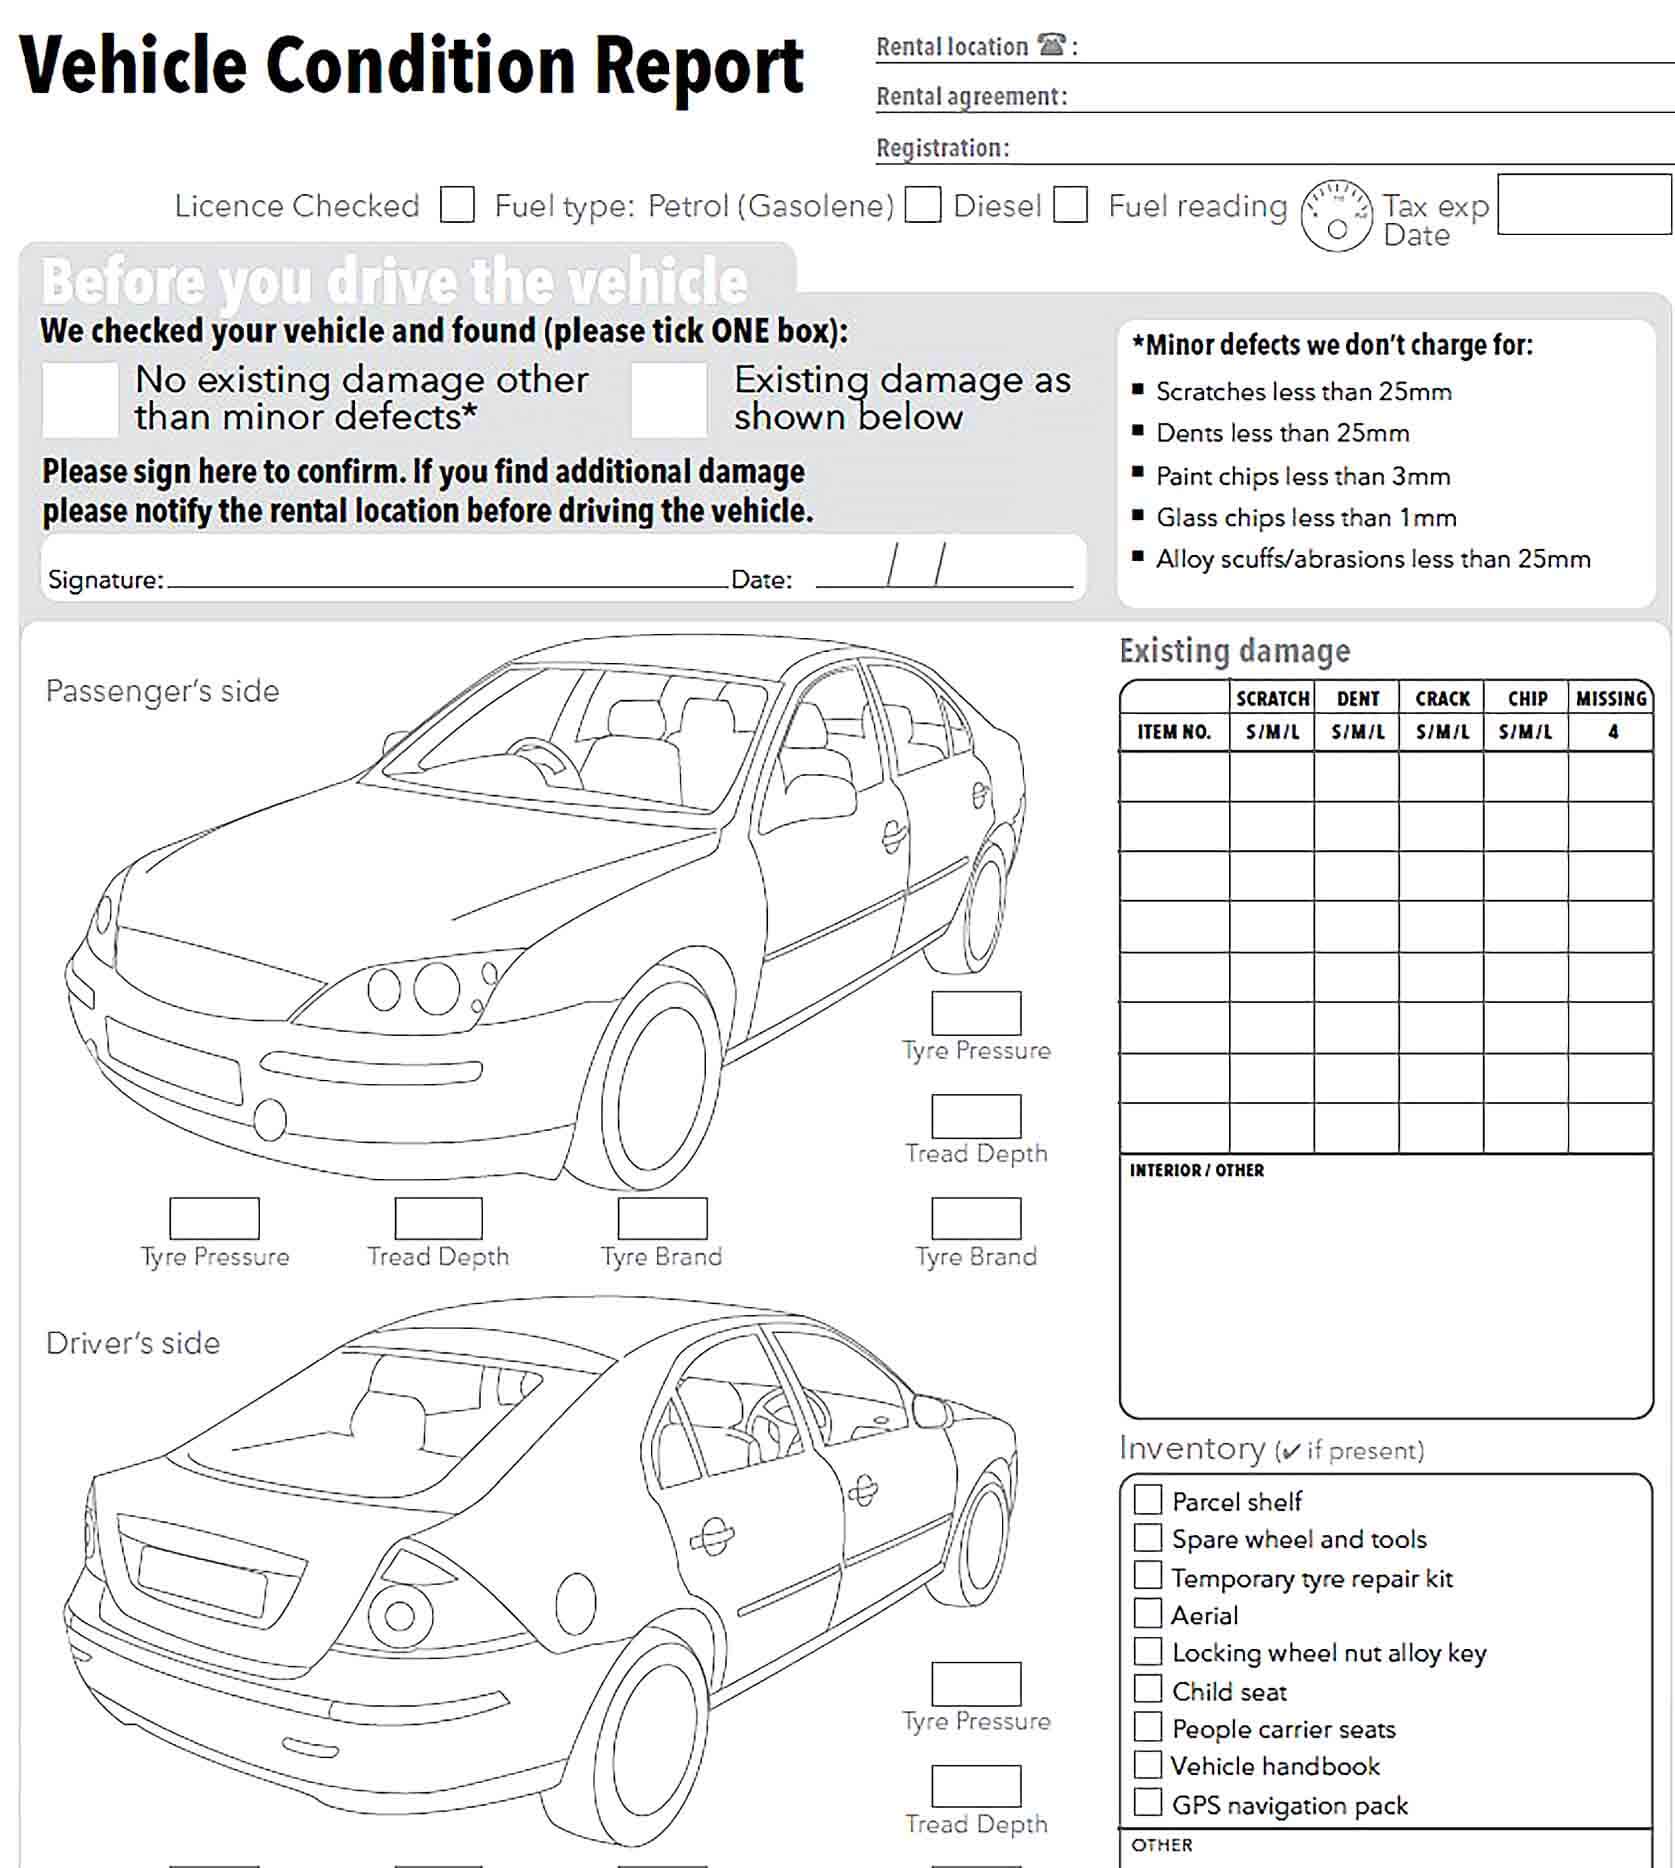 Sample Vehicle Condition Report Template